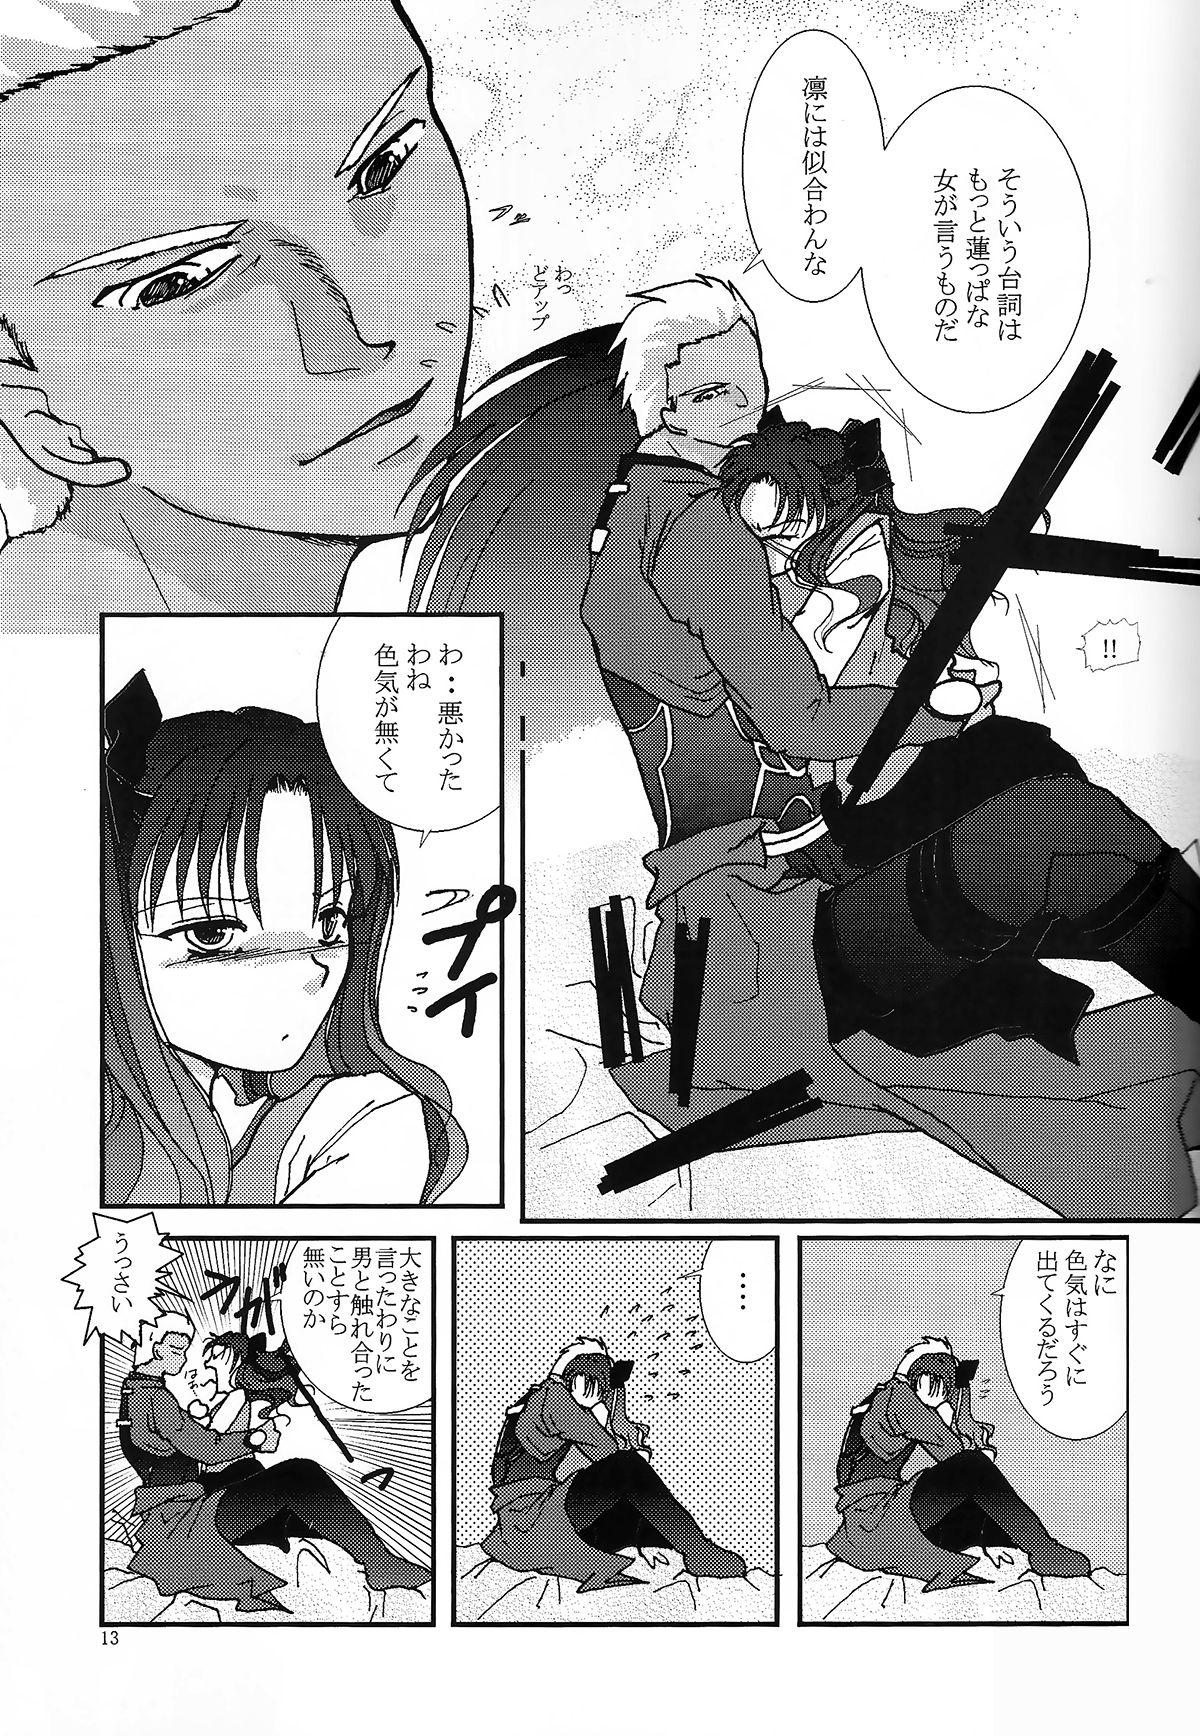 Oil Question-7 - Fate stay night Women Sucking Dicks - Page 11